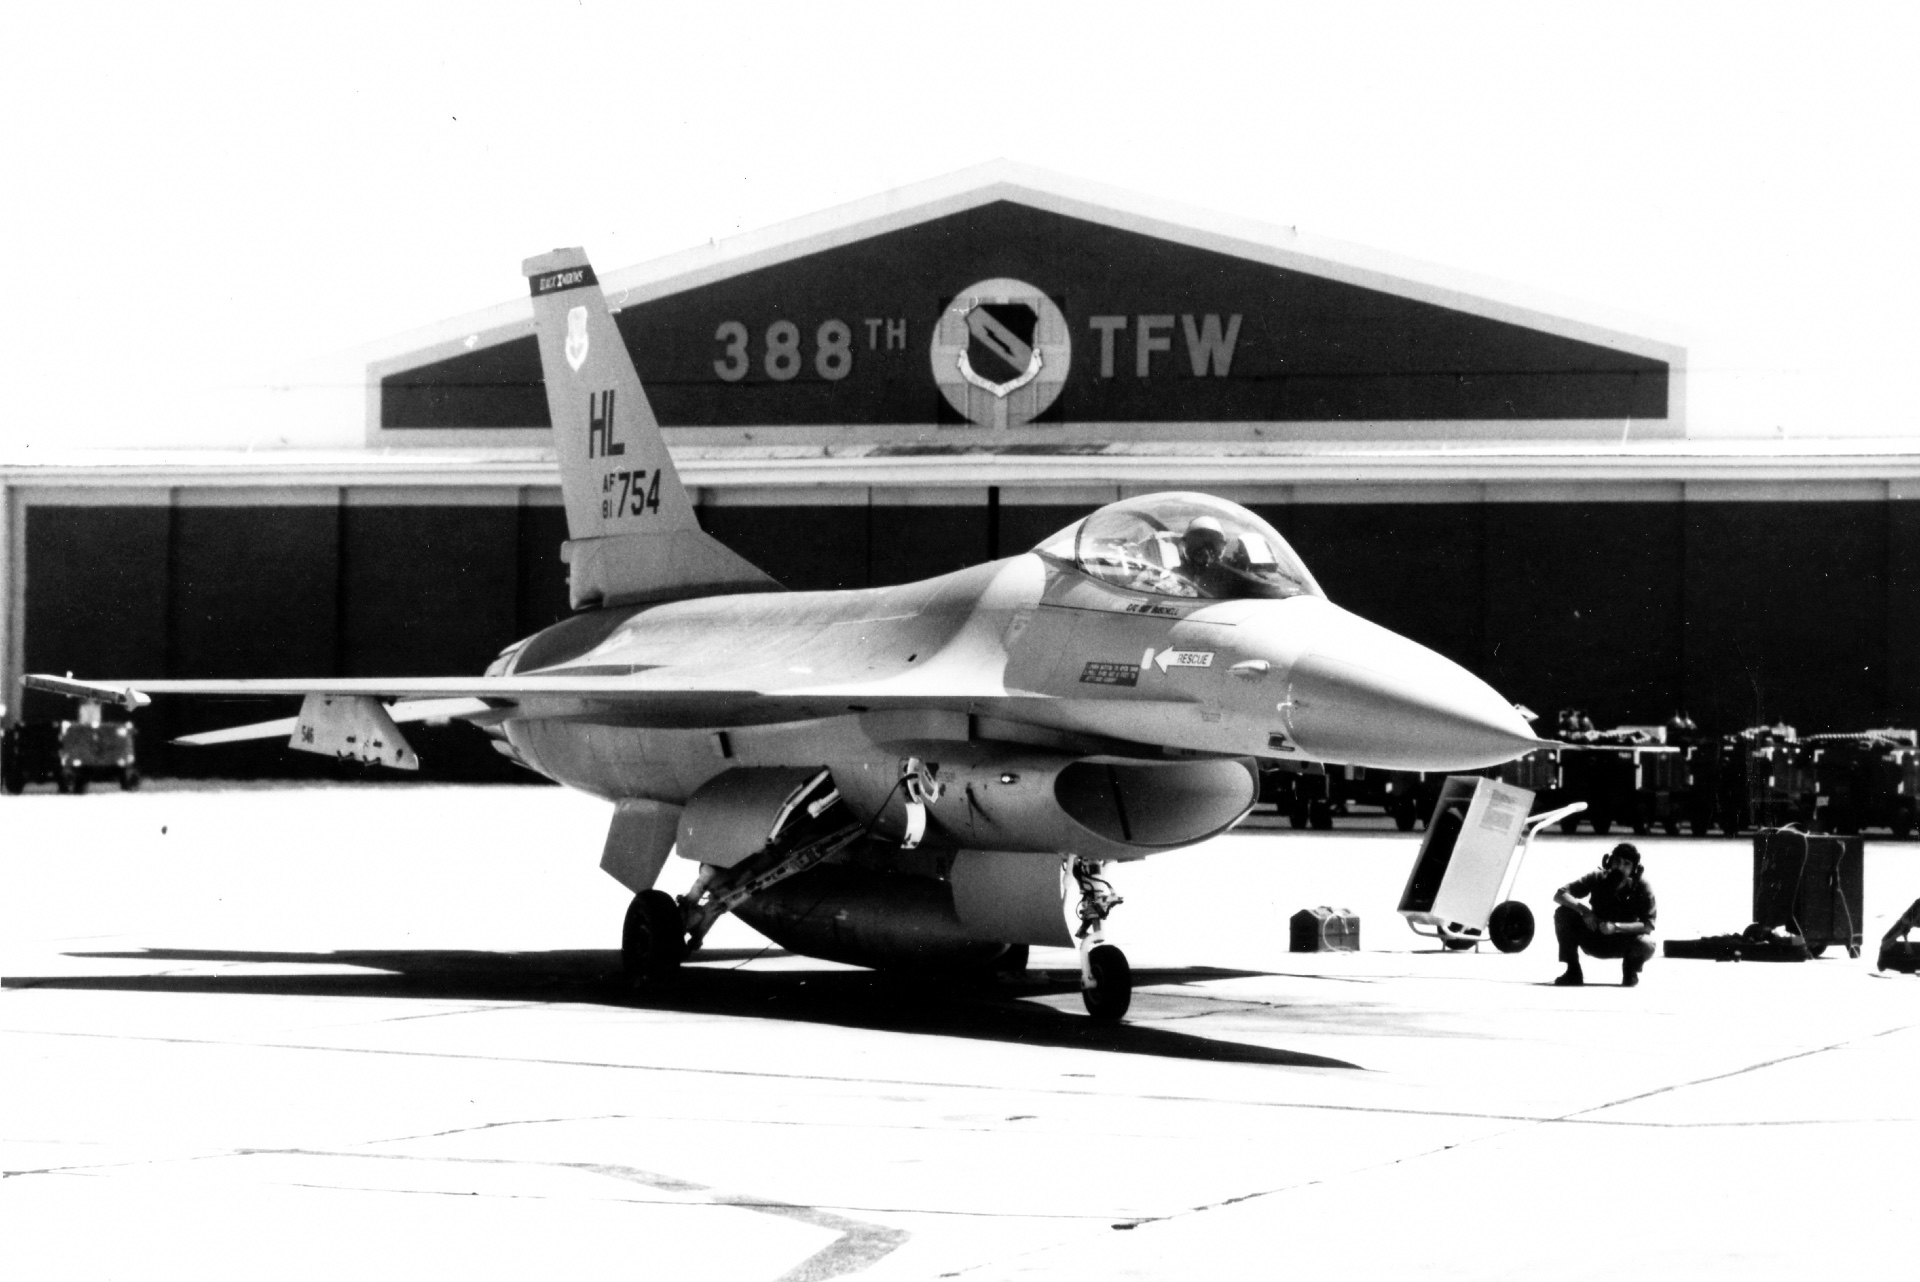 A F-16 from the 388th fighter squadron